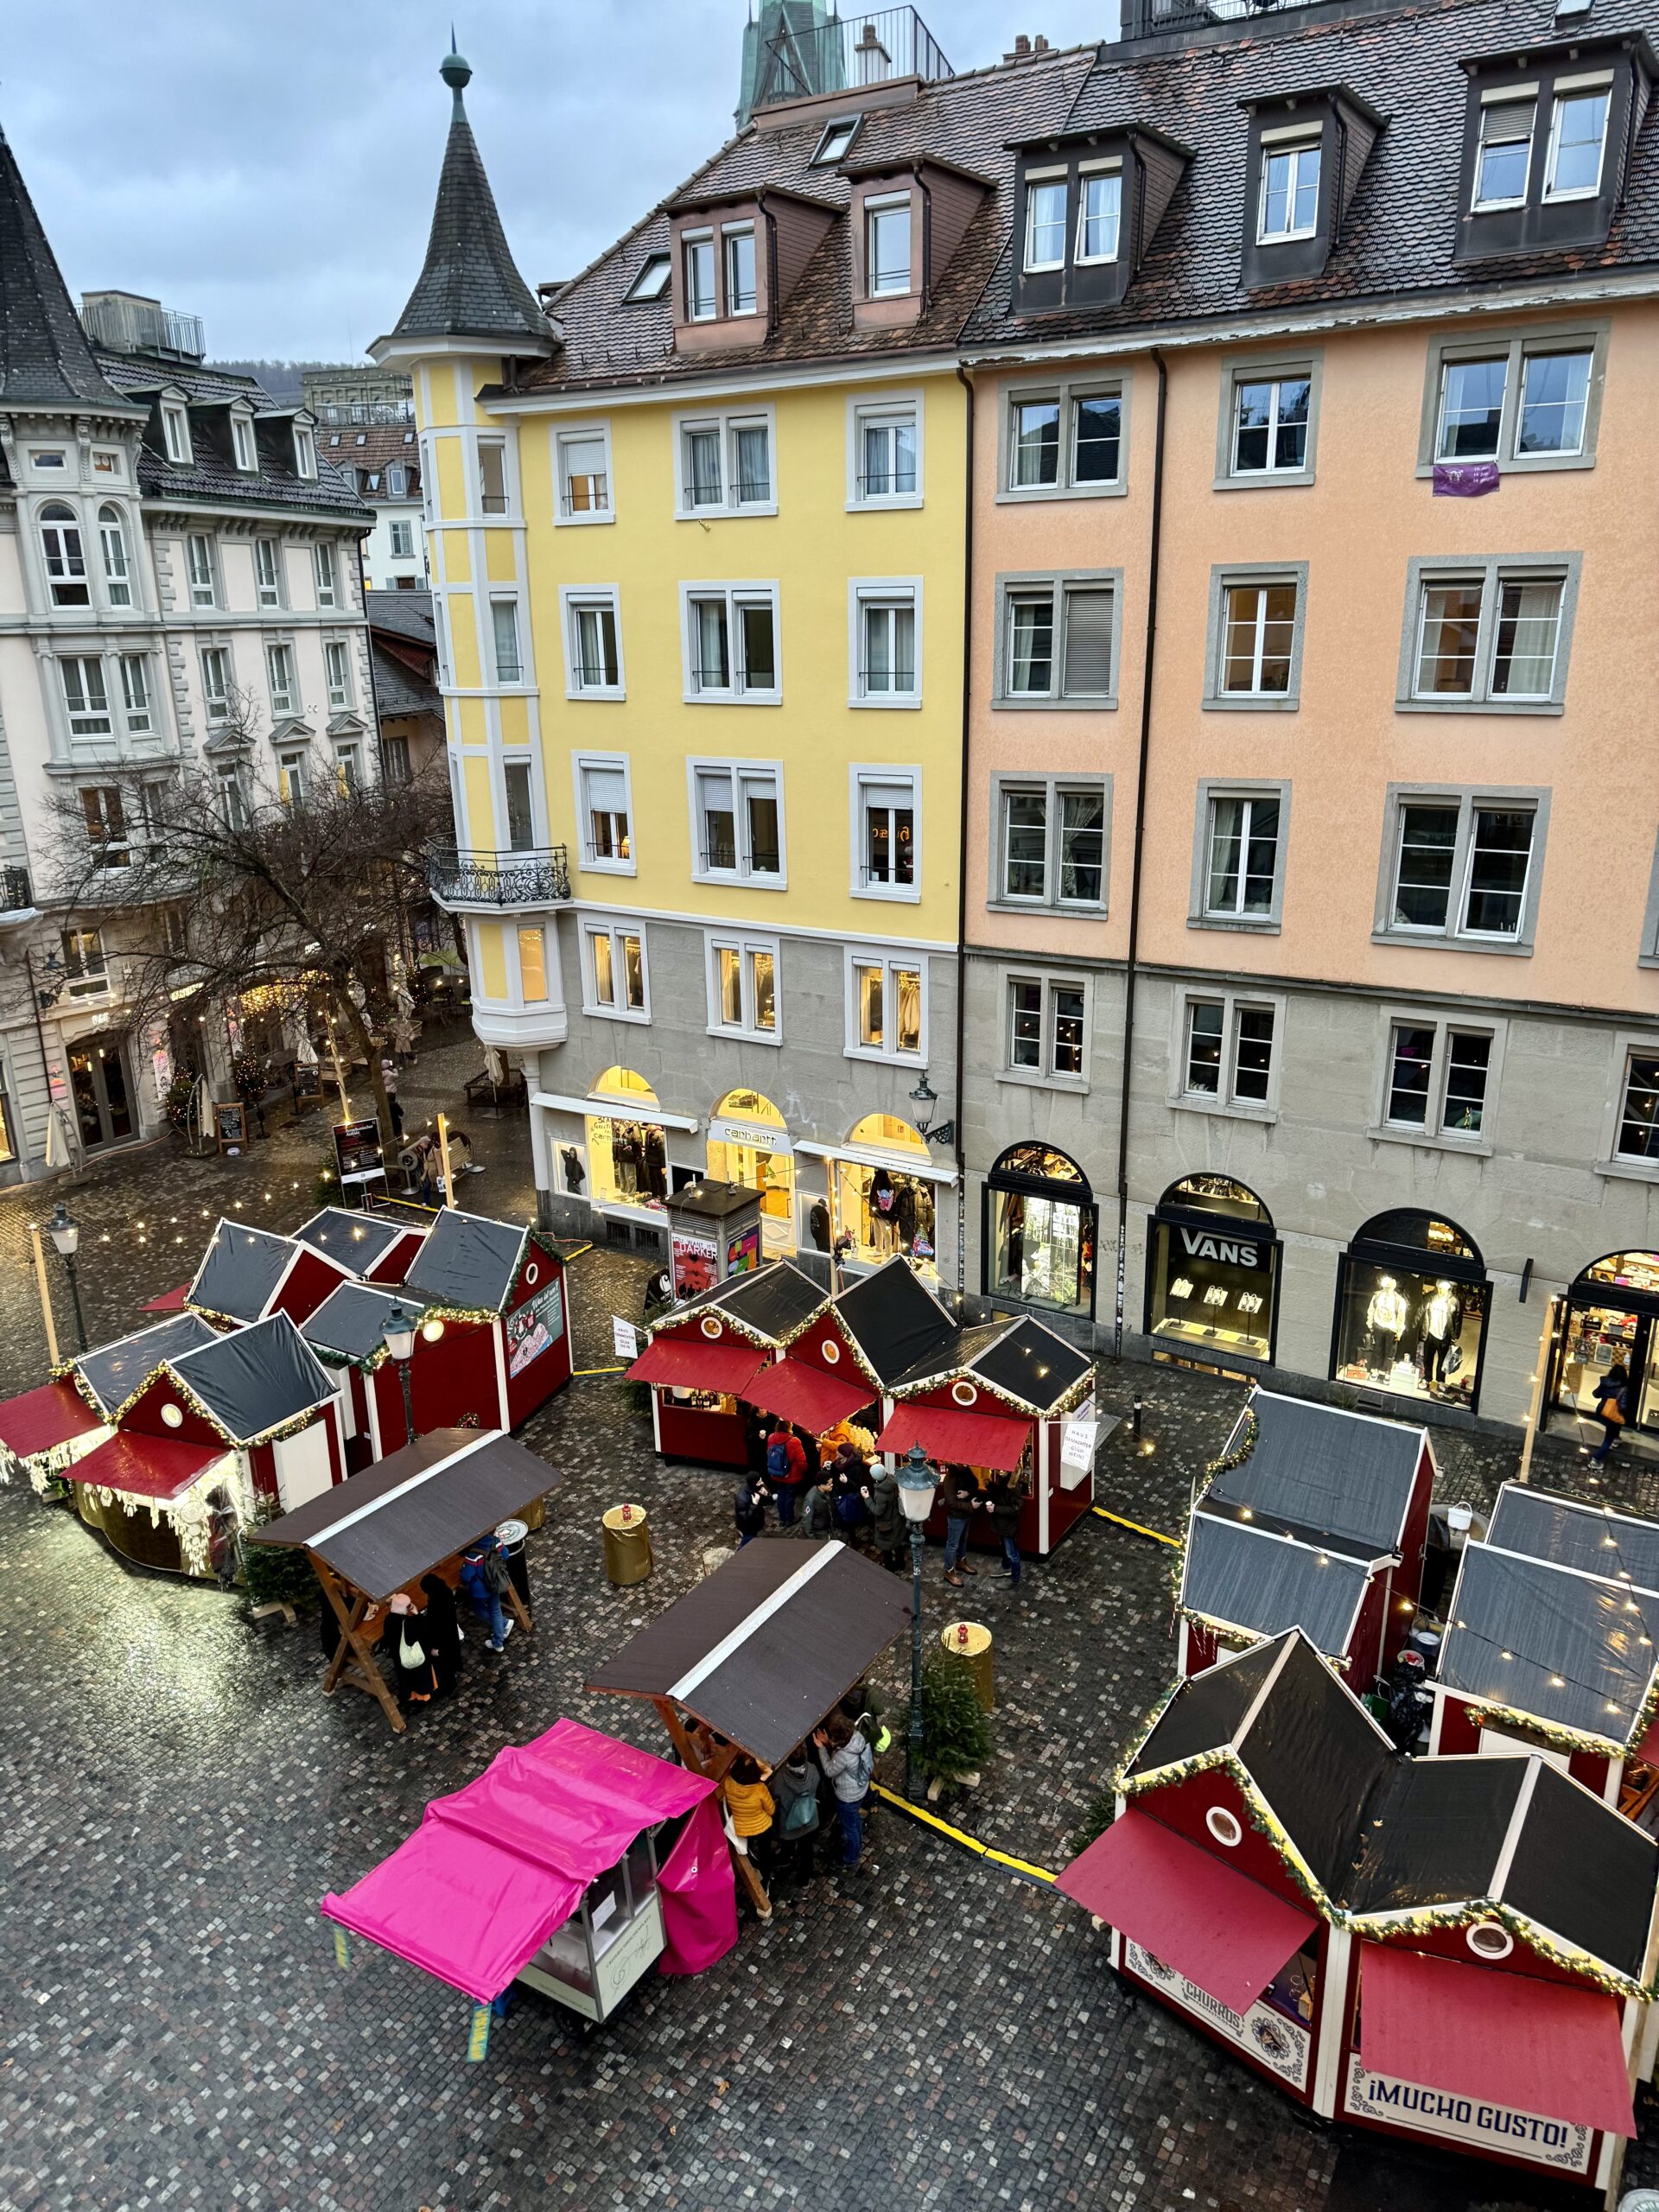 View from hotel window of market square in old town of Zurich